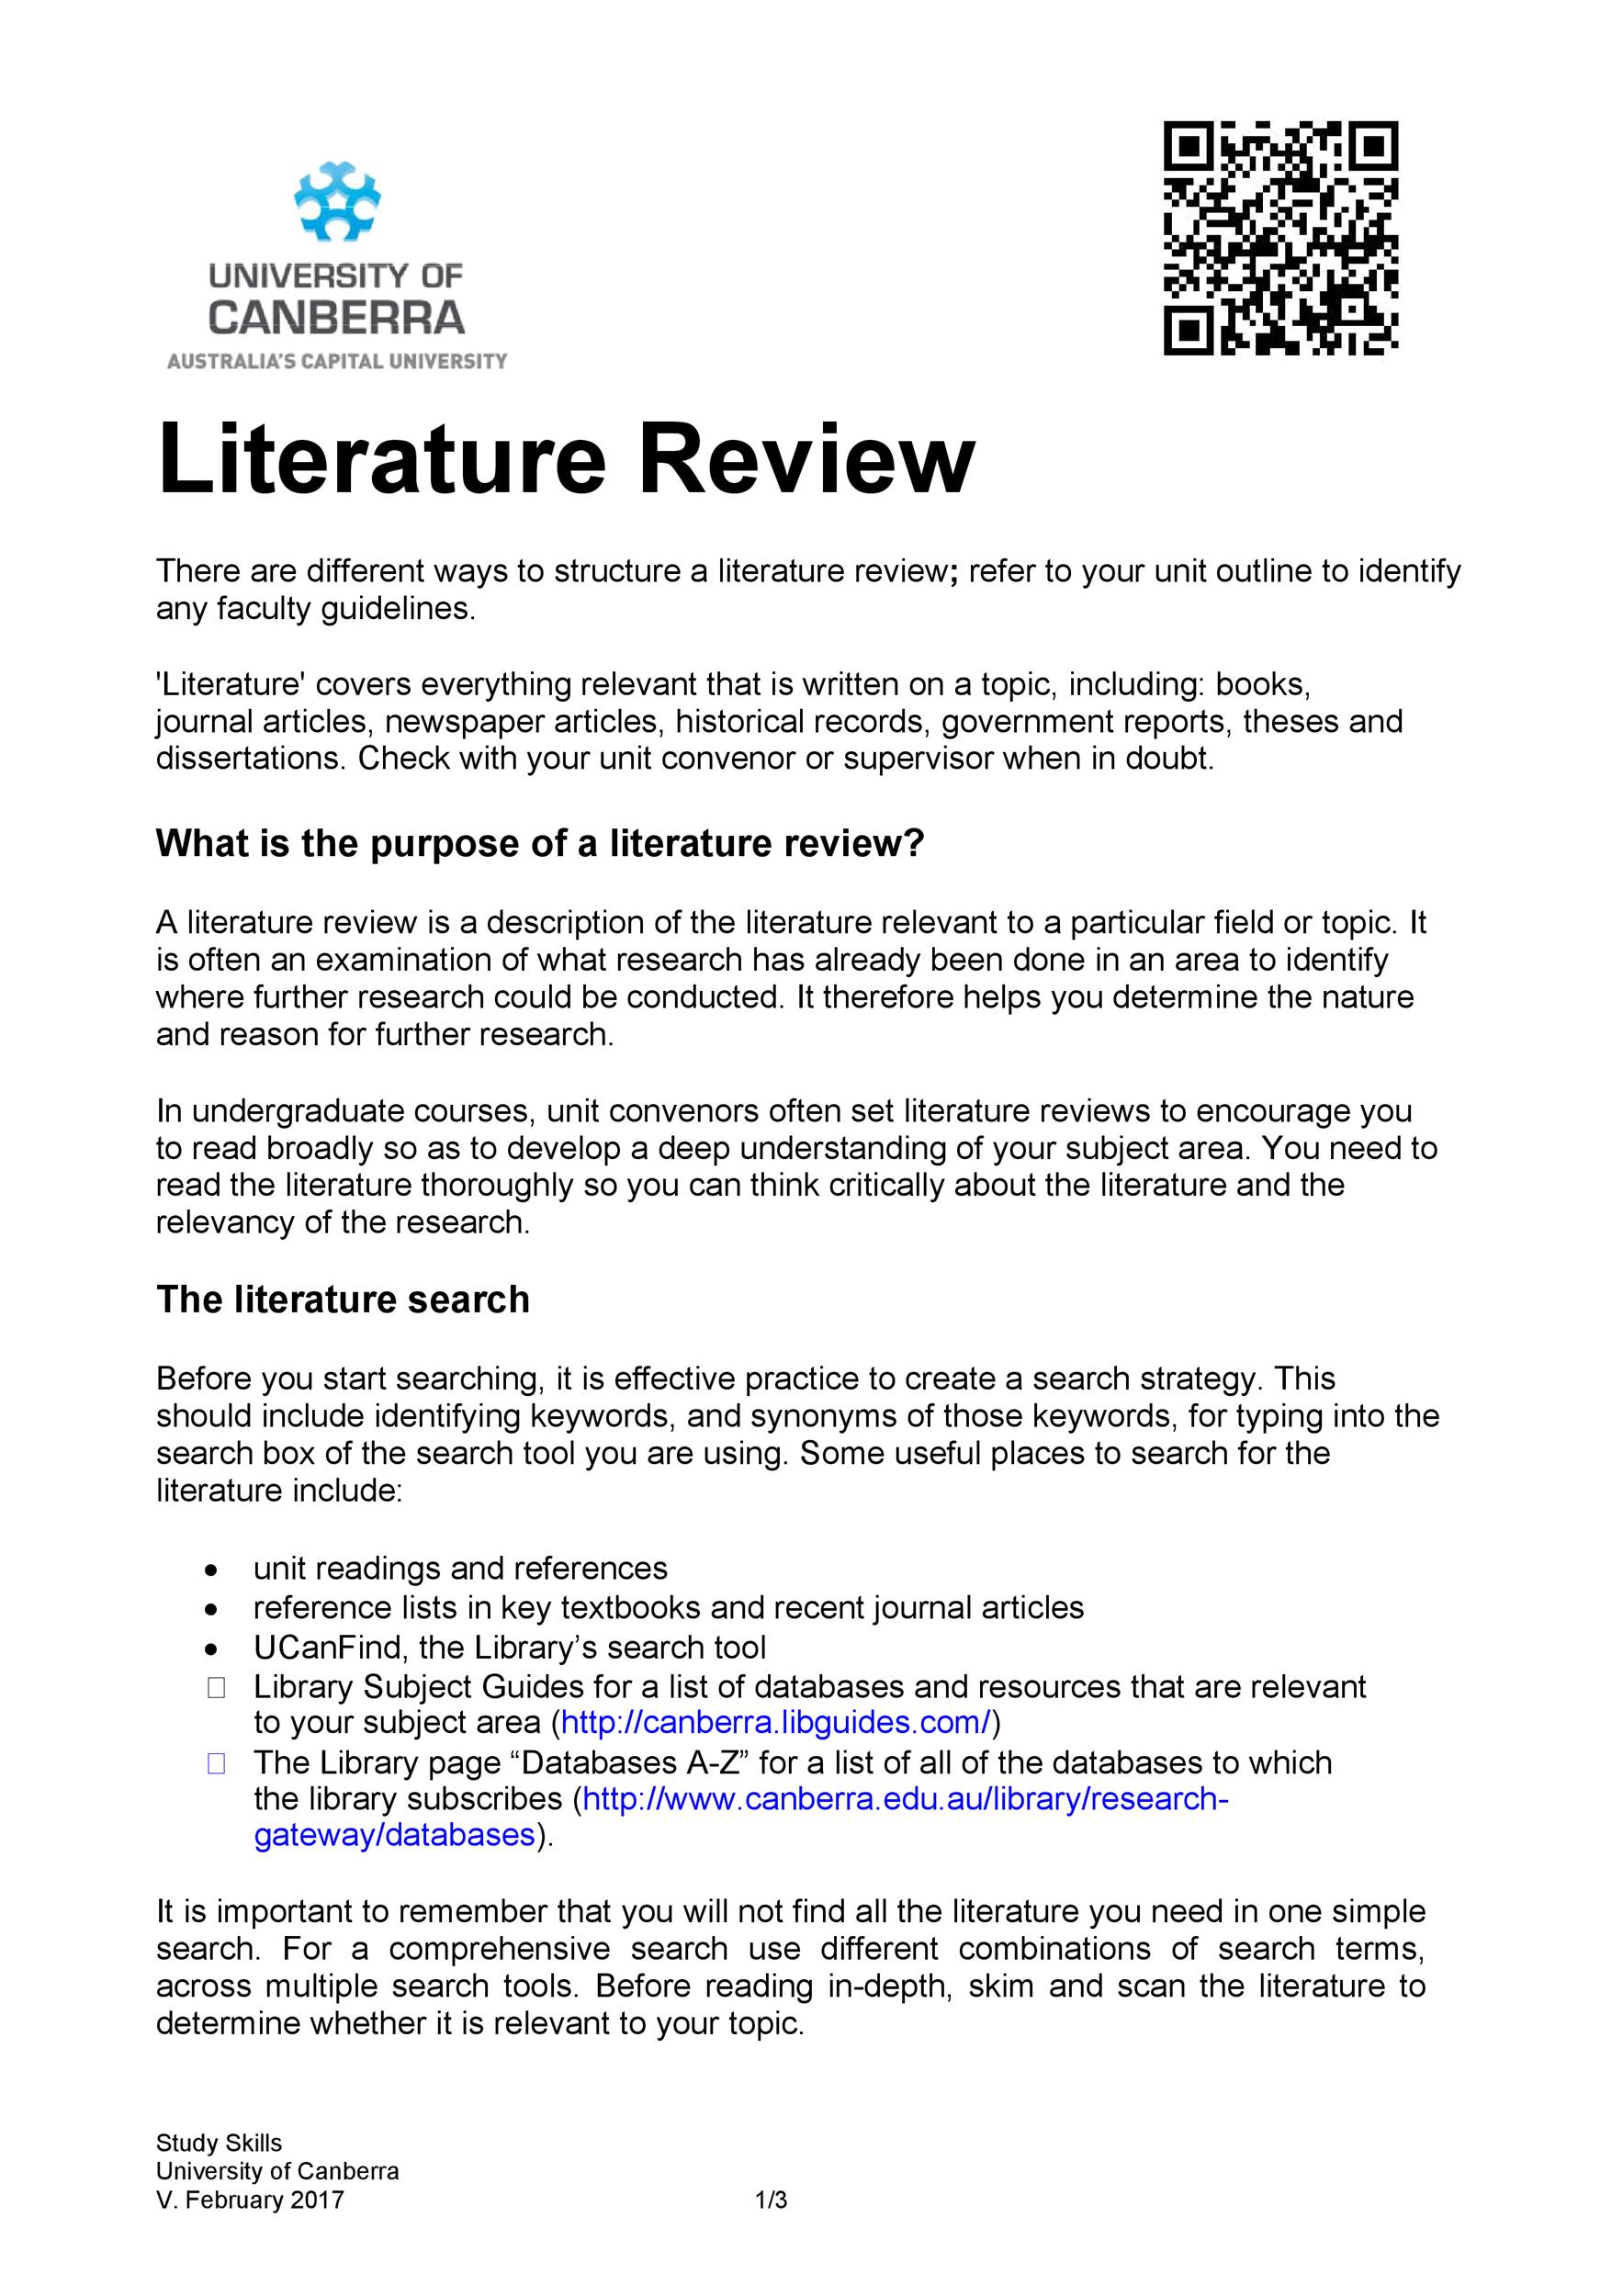 literature review how many words